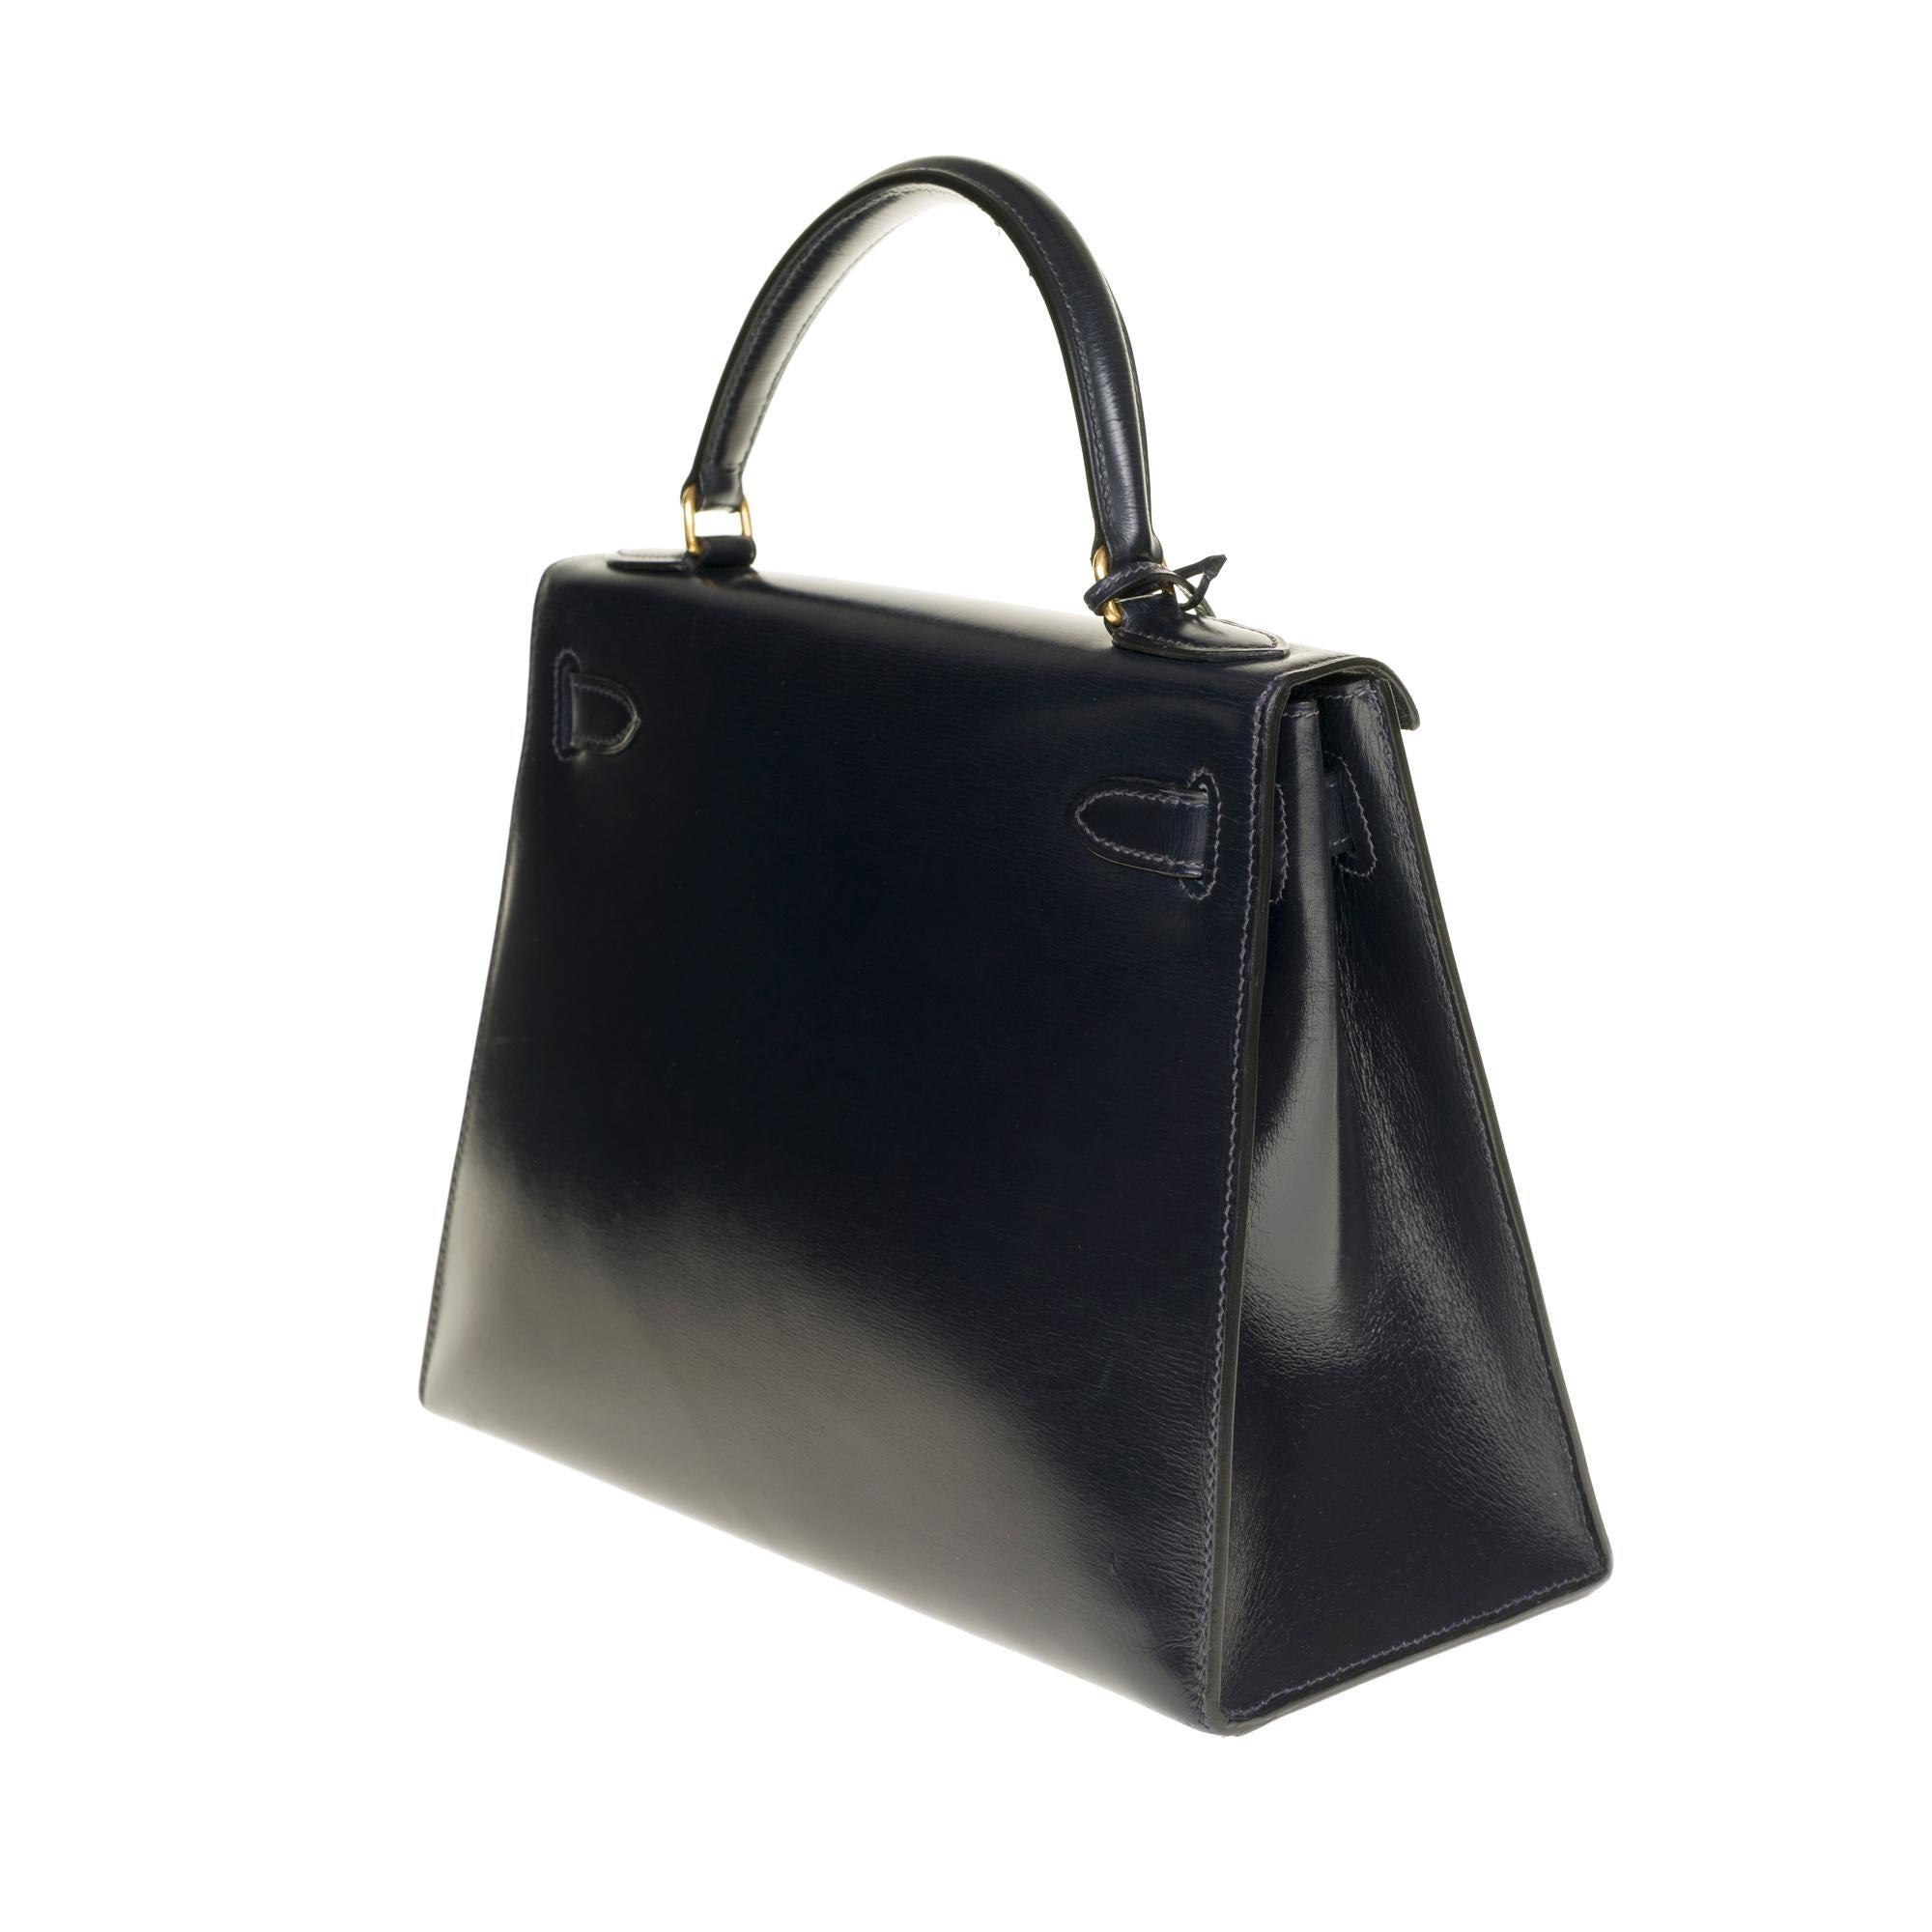 Black Amazing & Rare Hermès Mini Kelly 30cm sellier strap in navy blue calf and GHW